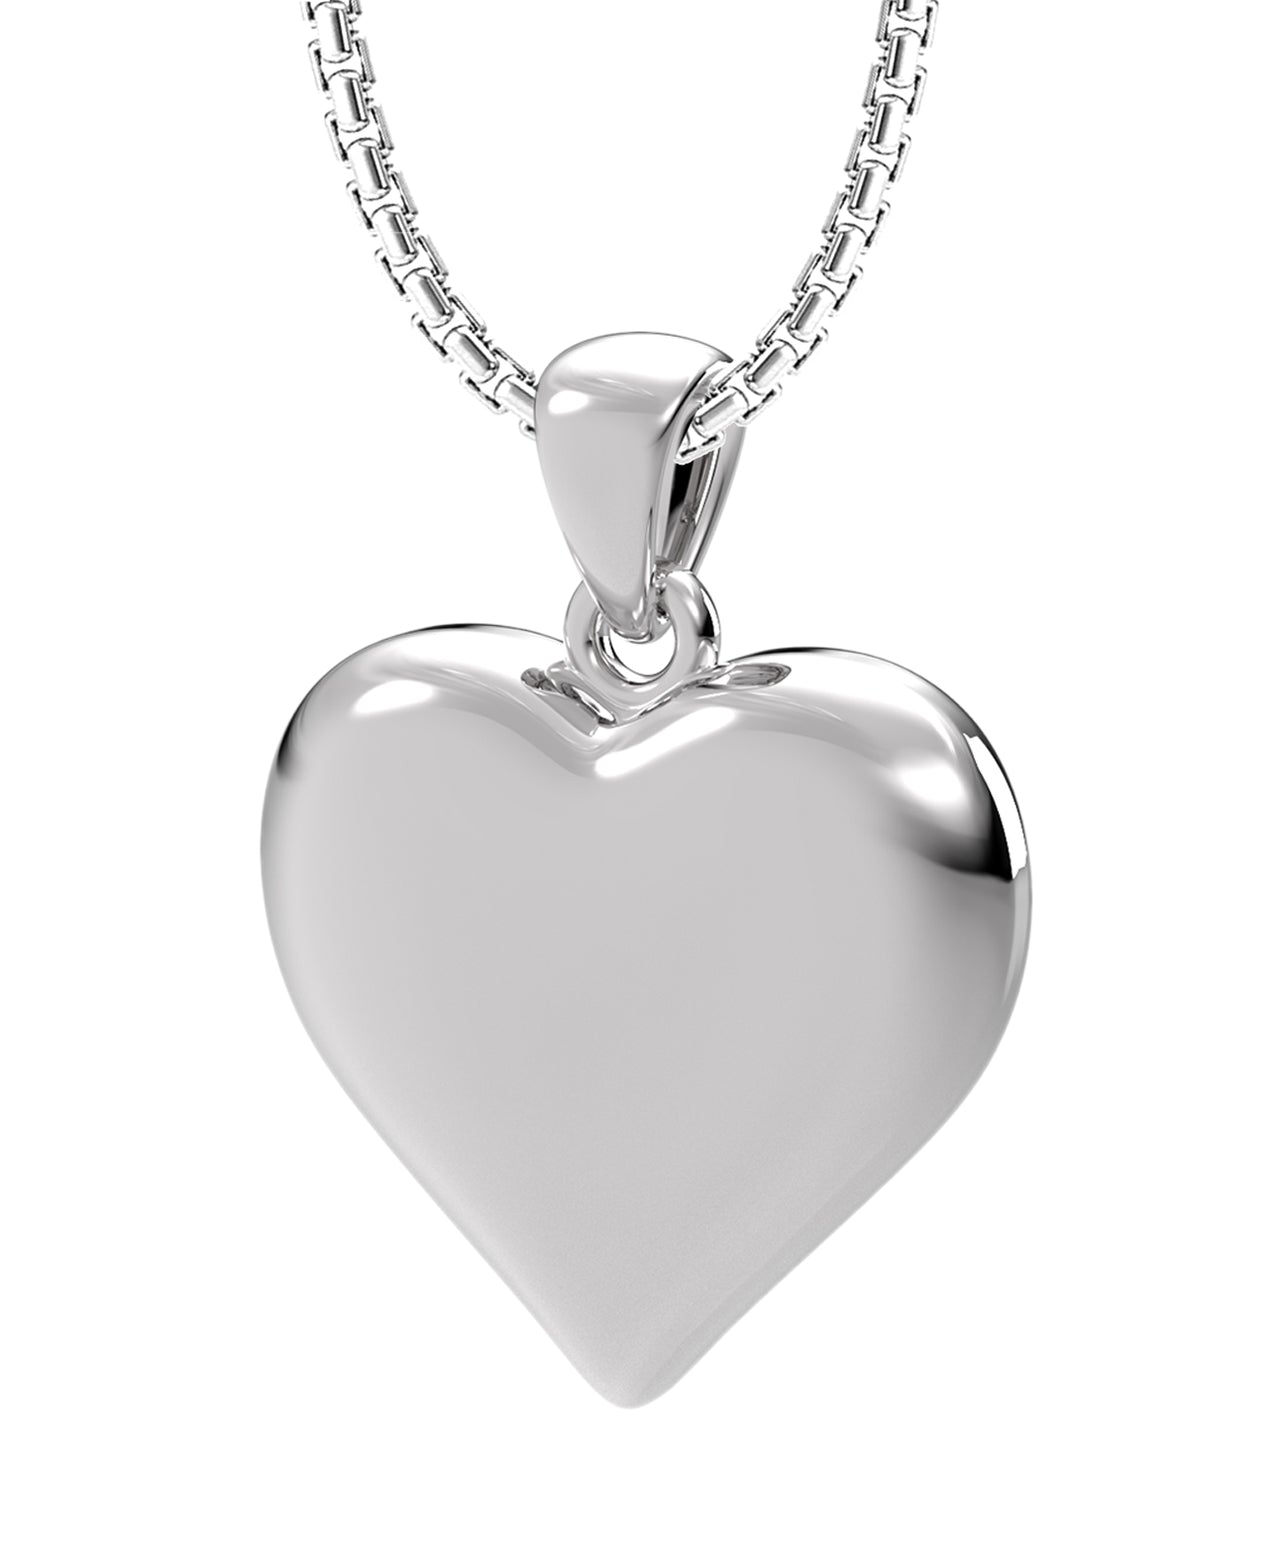 Ladies Sterling Silver Heart Pendant Necklace, 25mm